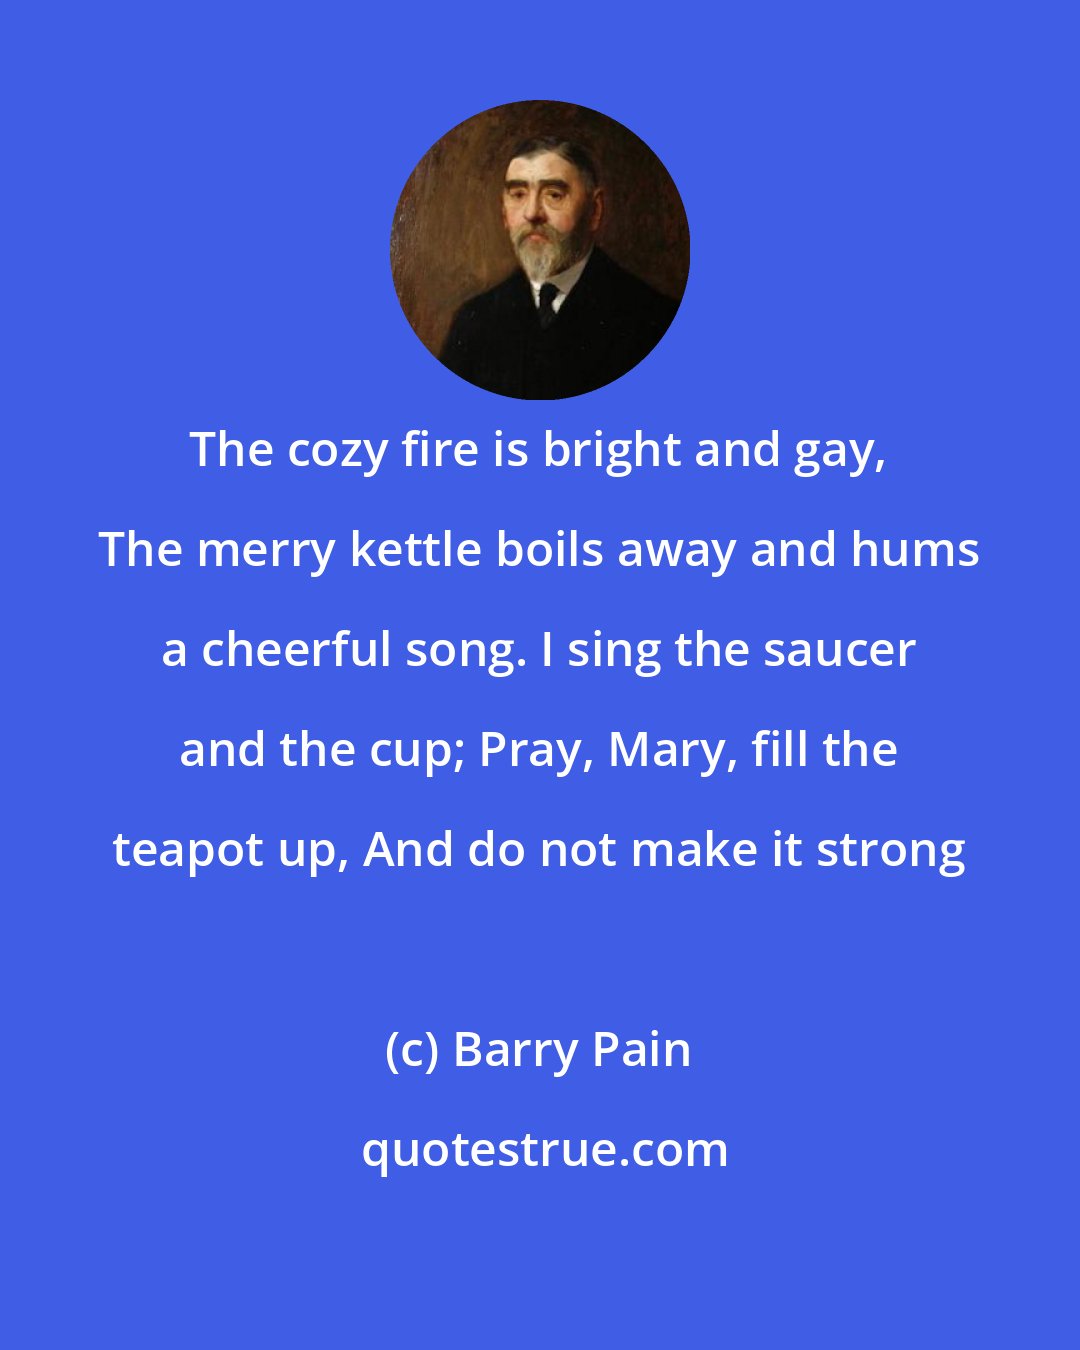 Barry Pain: The cozy fire is bright and gay, The merry kettle boils away and hums a cheerful song. I sing the saucer and the cup; Pray, Mary, fill the teapot up, And do not make it strong